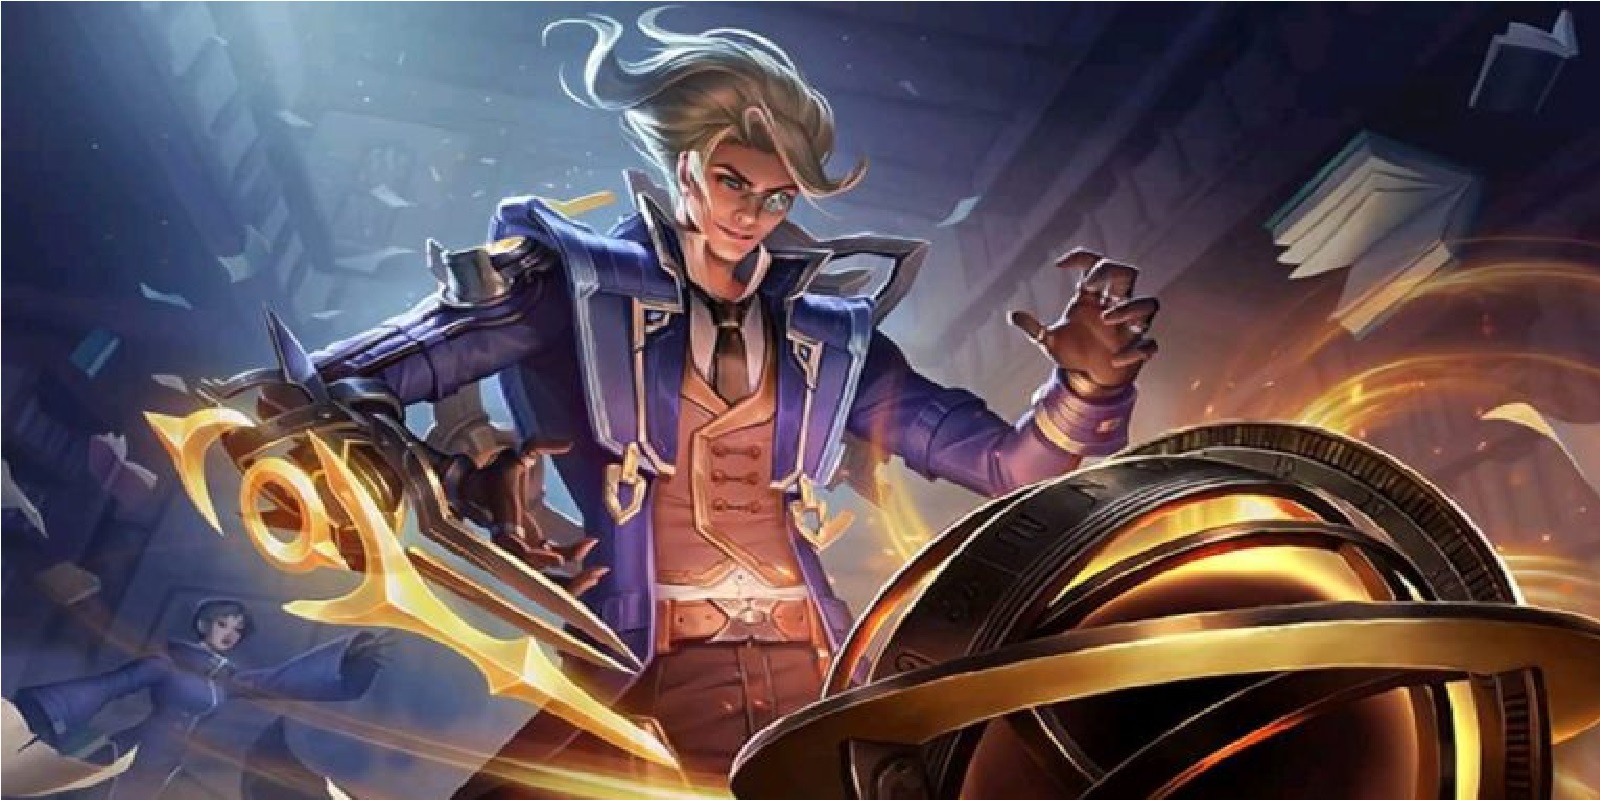 Story of Hero Nathan Mobile Legends (ML)